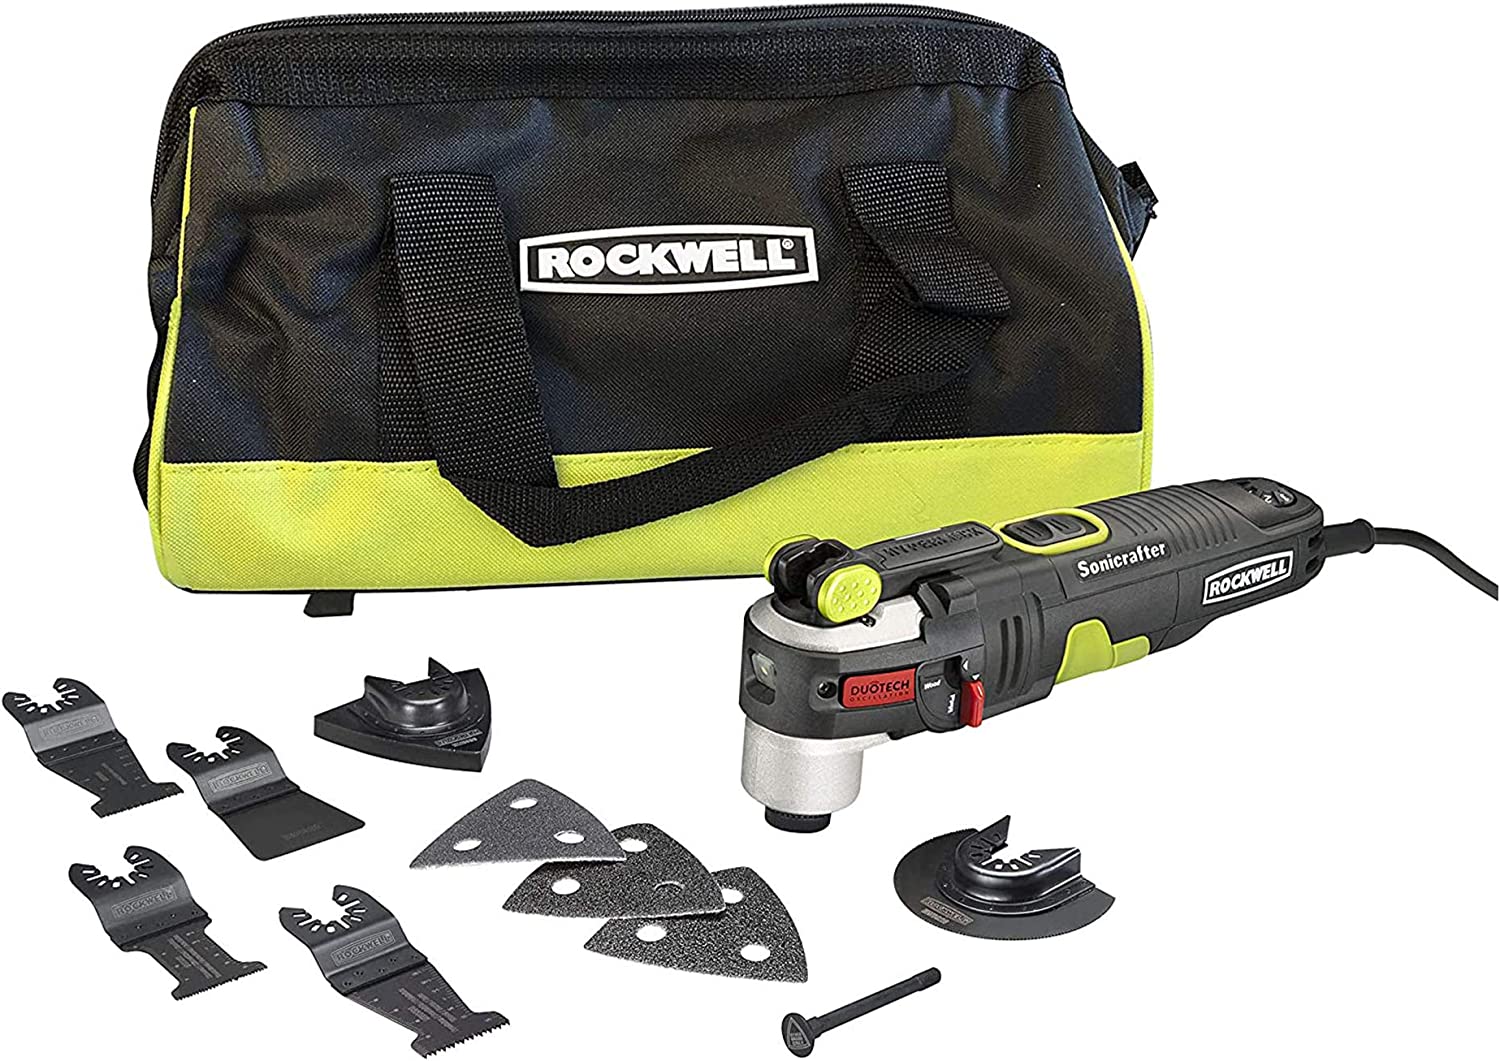 Rockwell AW400 F80 Sonicrafter 4.2 Amp Oscillating Multi Tool